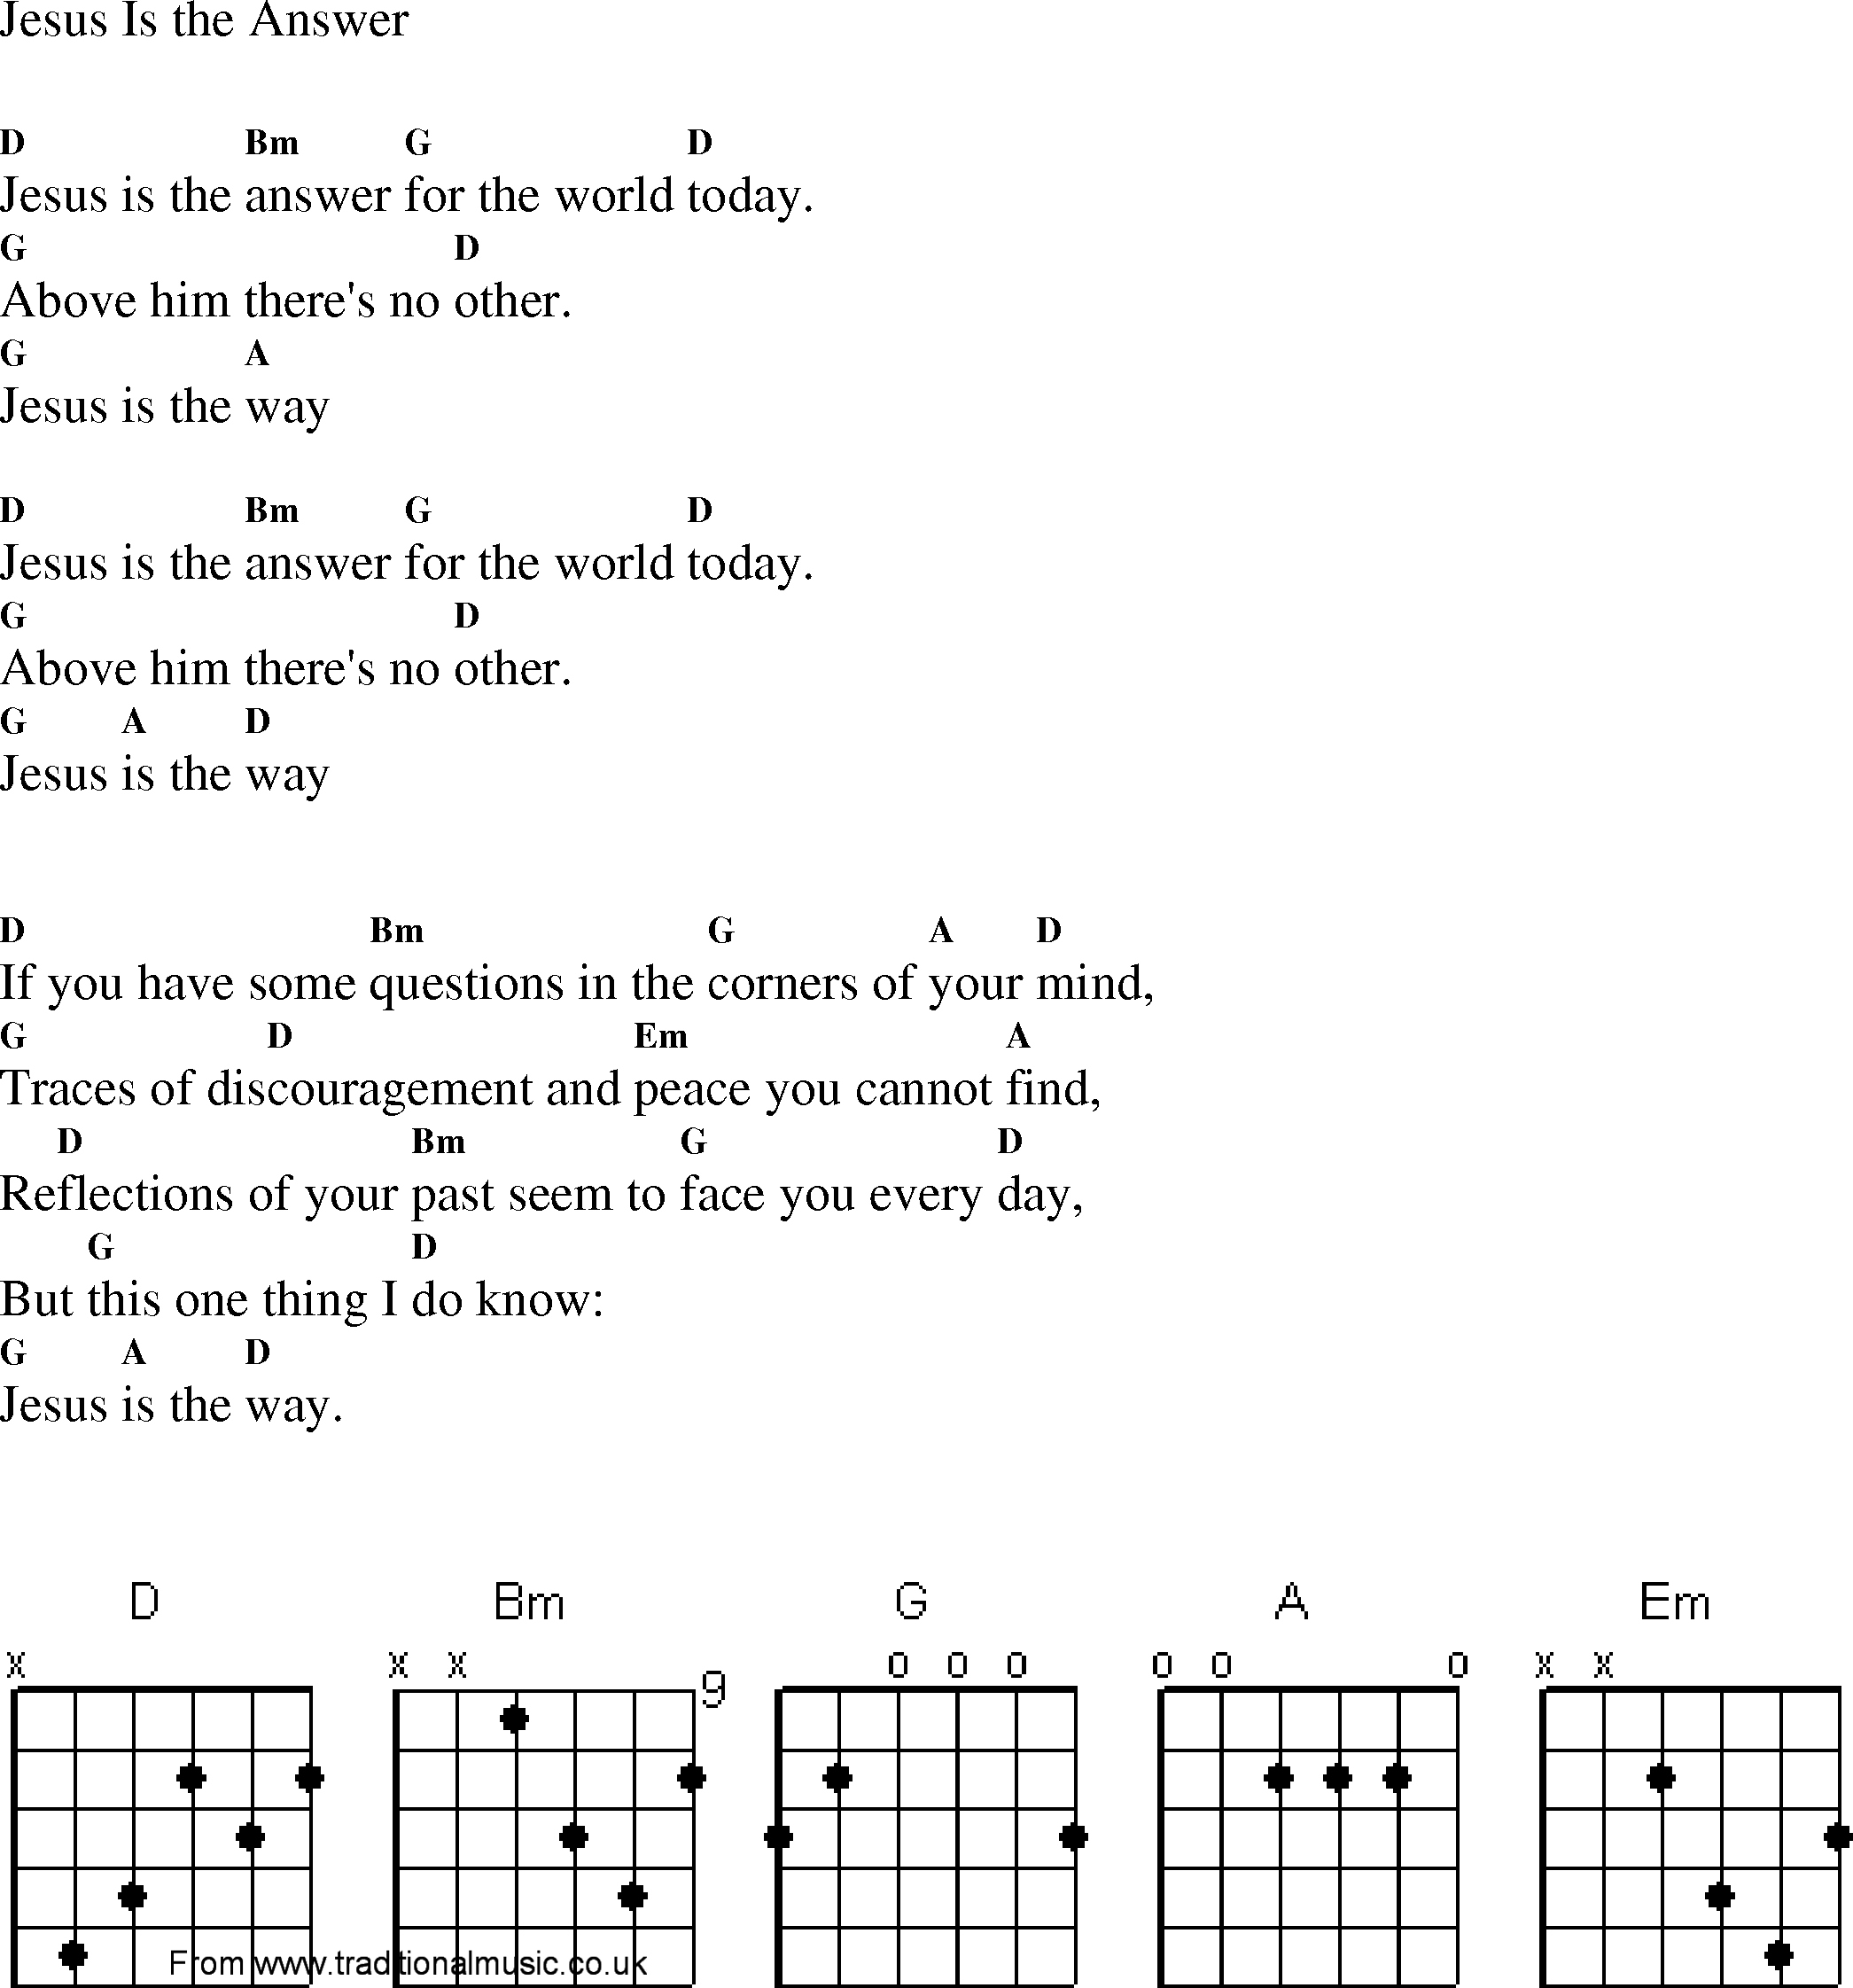 Gospel Song: jesus_is_the_answer, lyrics and chords.